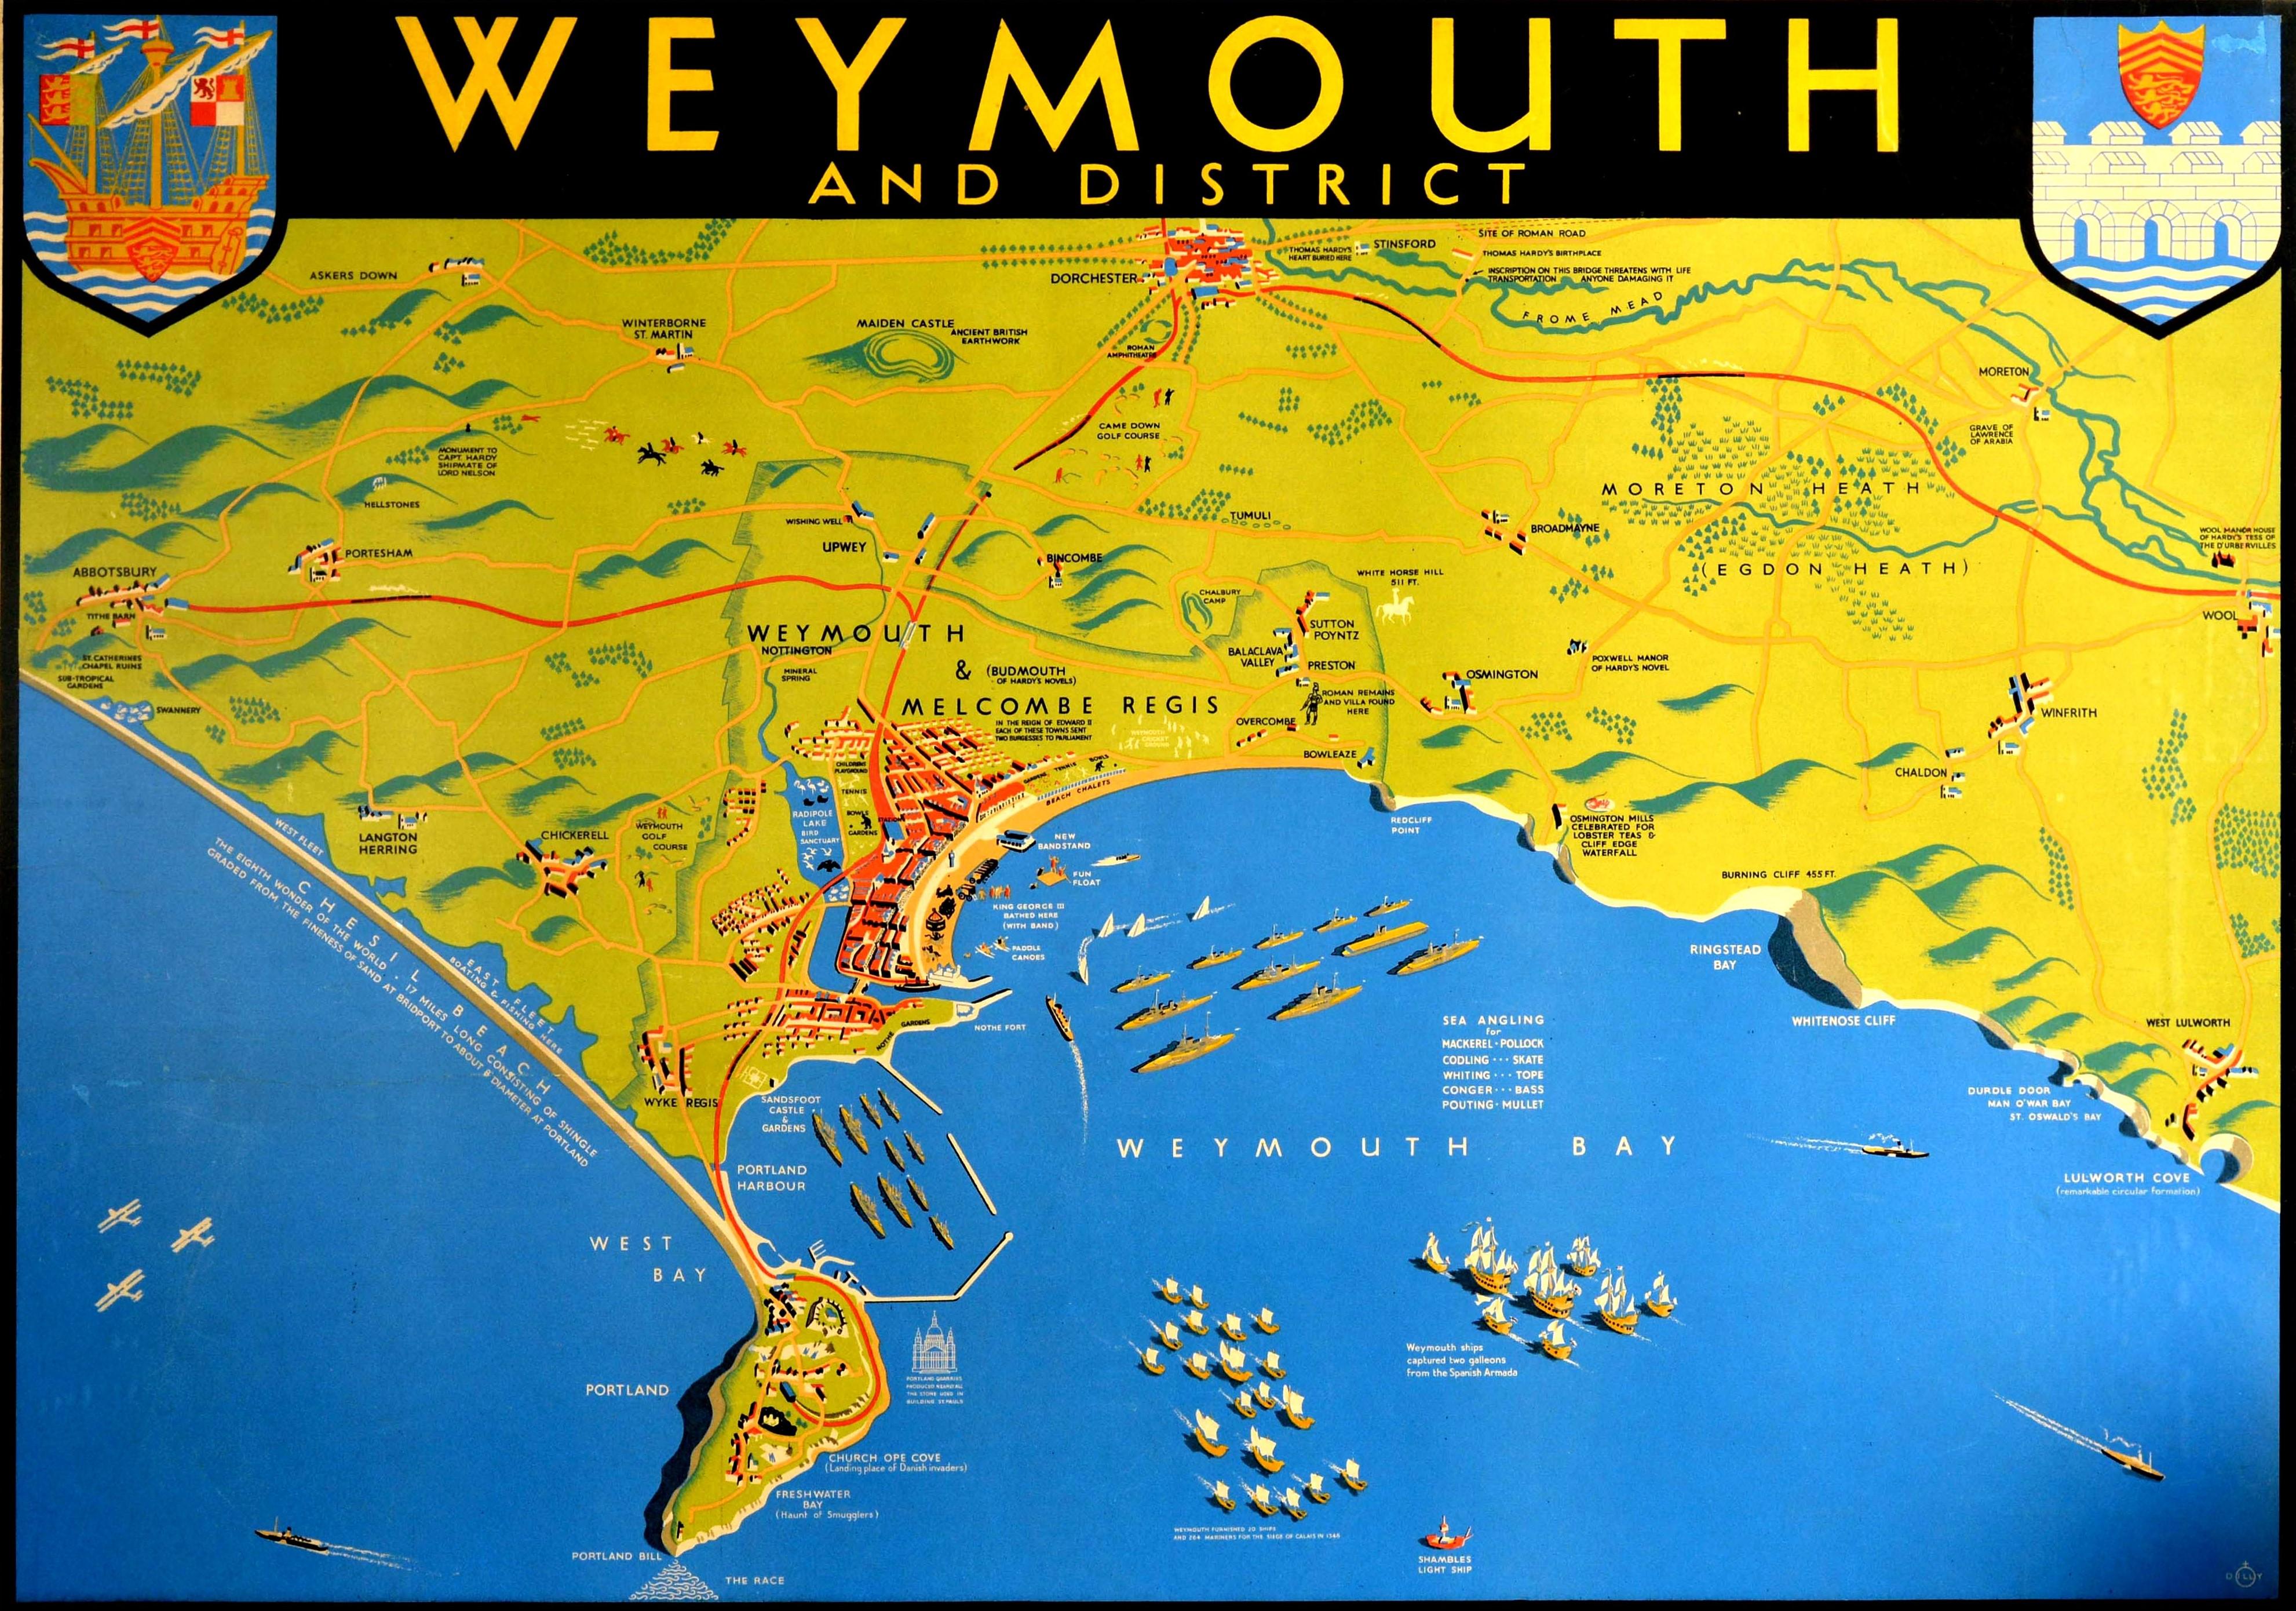 Original vintage railway travel poster for Weymouth and District Frequent Express Trains and Cheap Fares GWR Great Western Railway SR Southern Railway featuring a pictorial map of Weymouth and Melcombe Regis with significant locations and historical